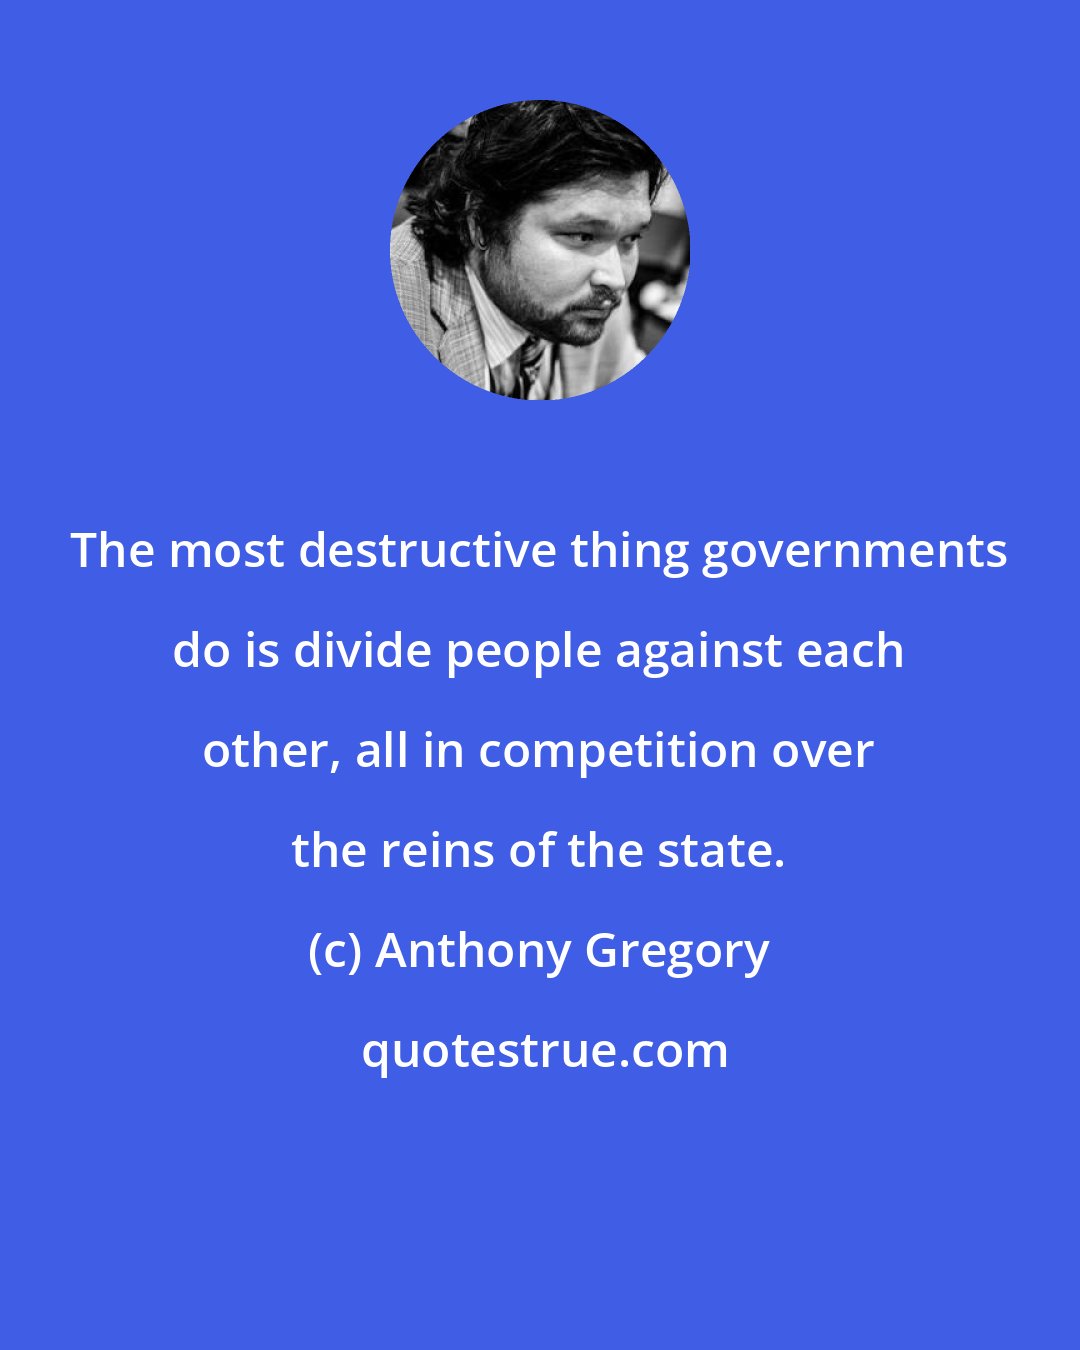 Anthony Gregory: The most destructive thing governments do is divide people against each other, all in competition over the reins of the state.